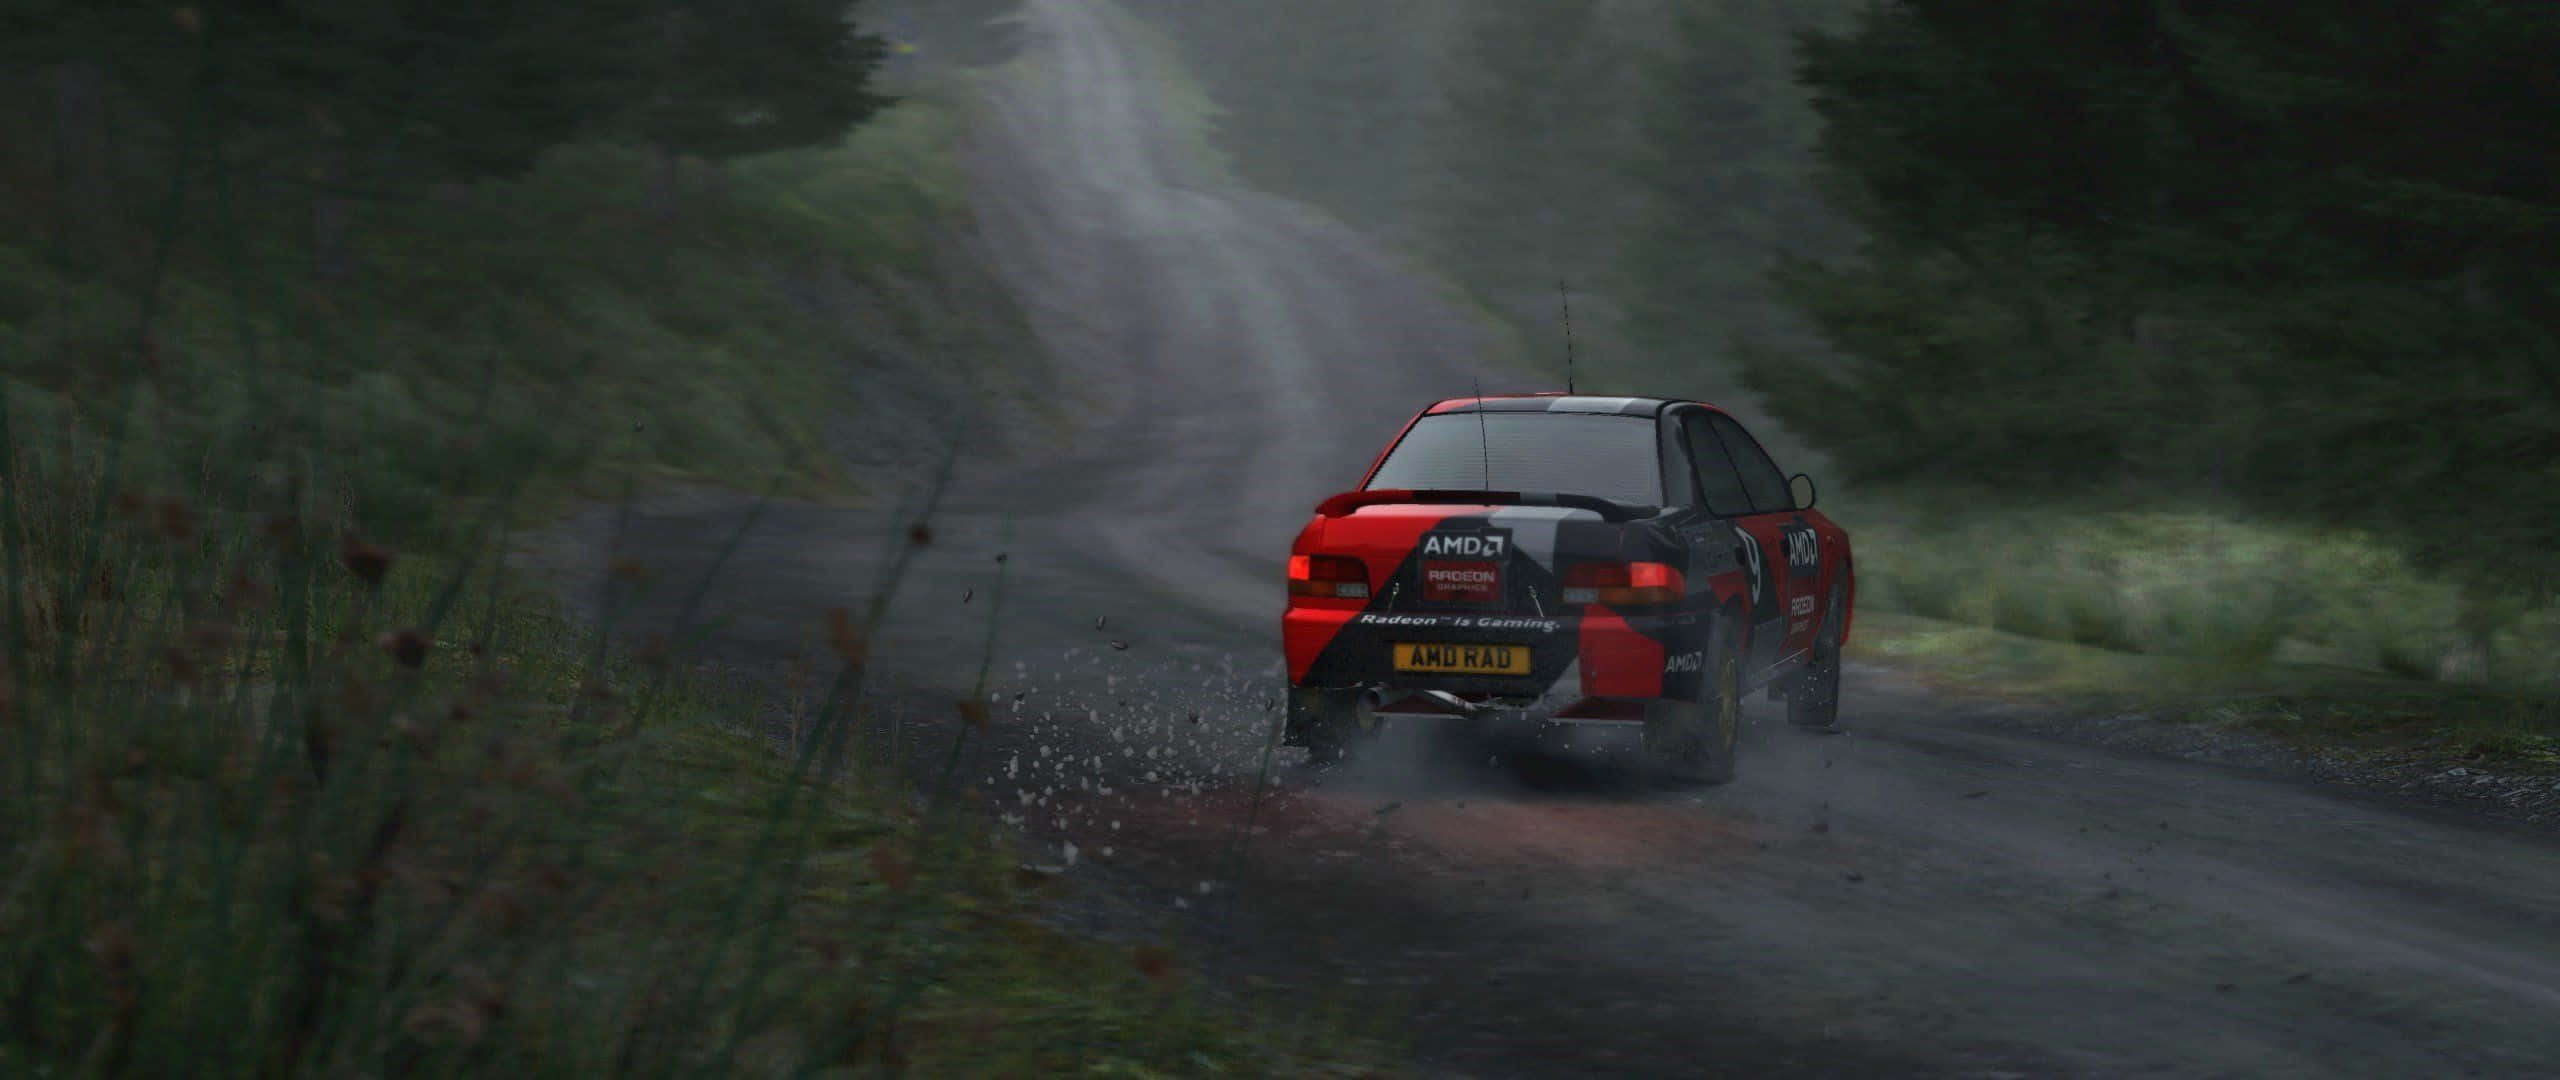 Take on the ultimate rally challenge with Dirt Rally